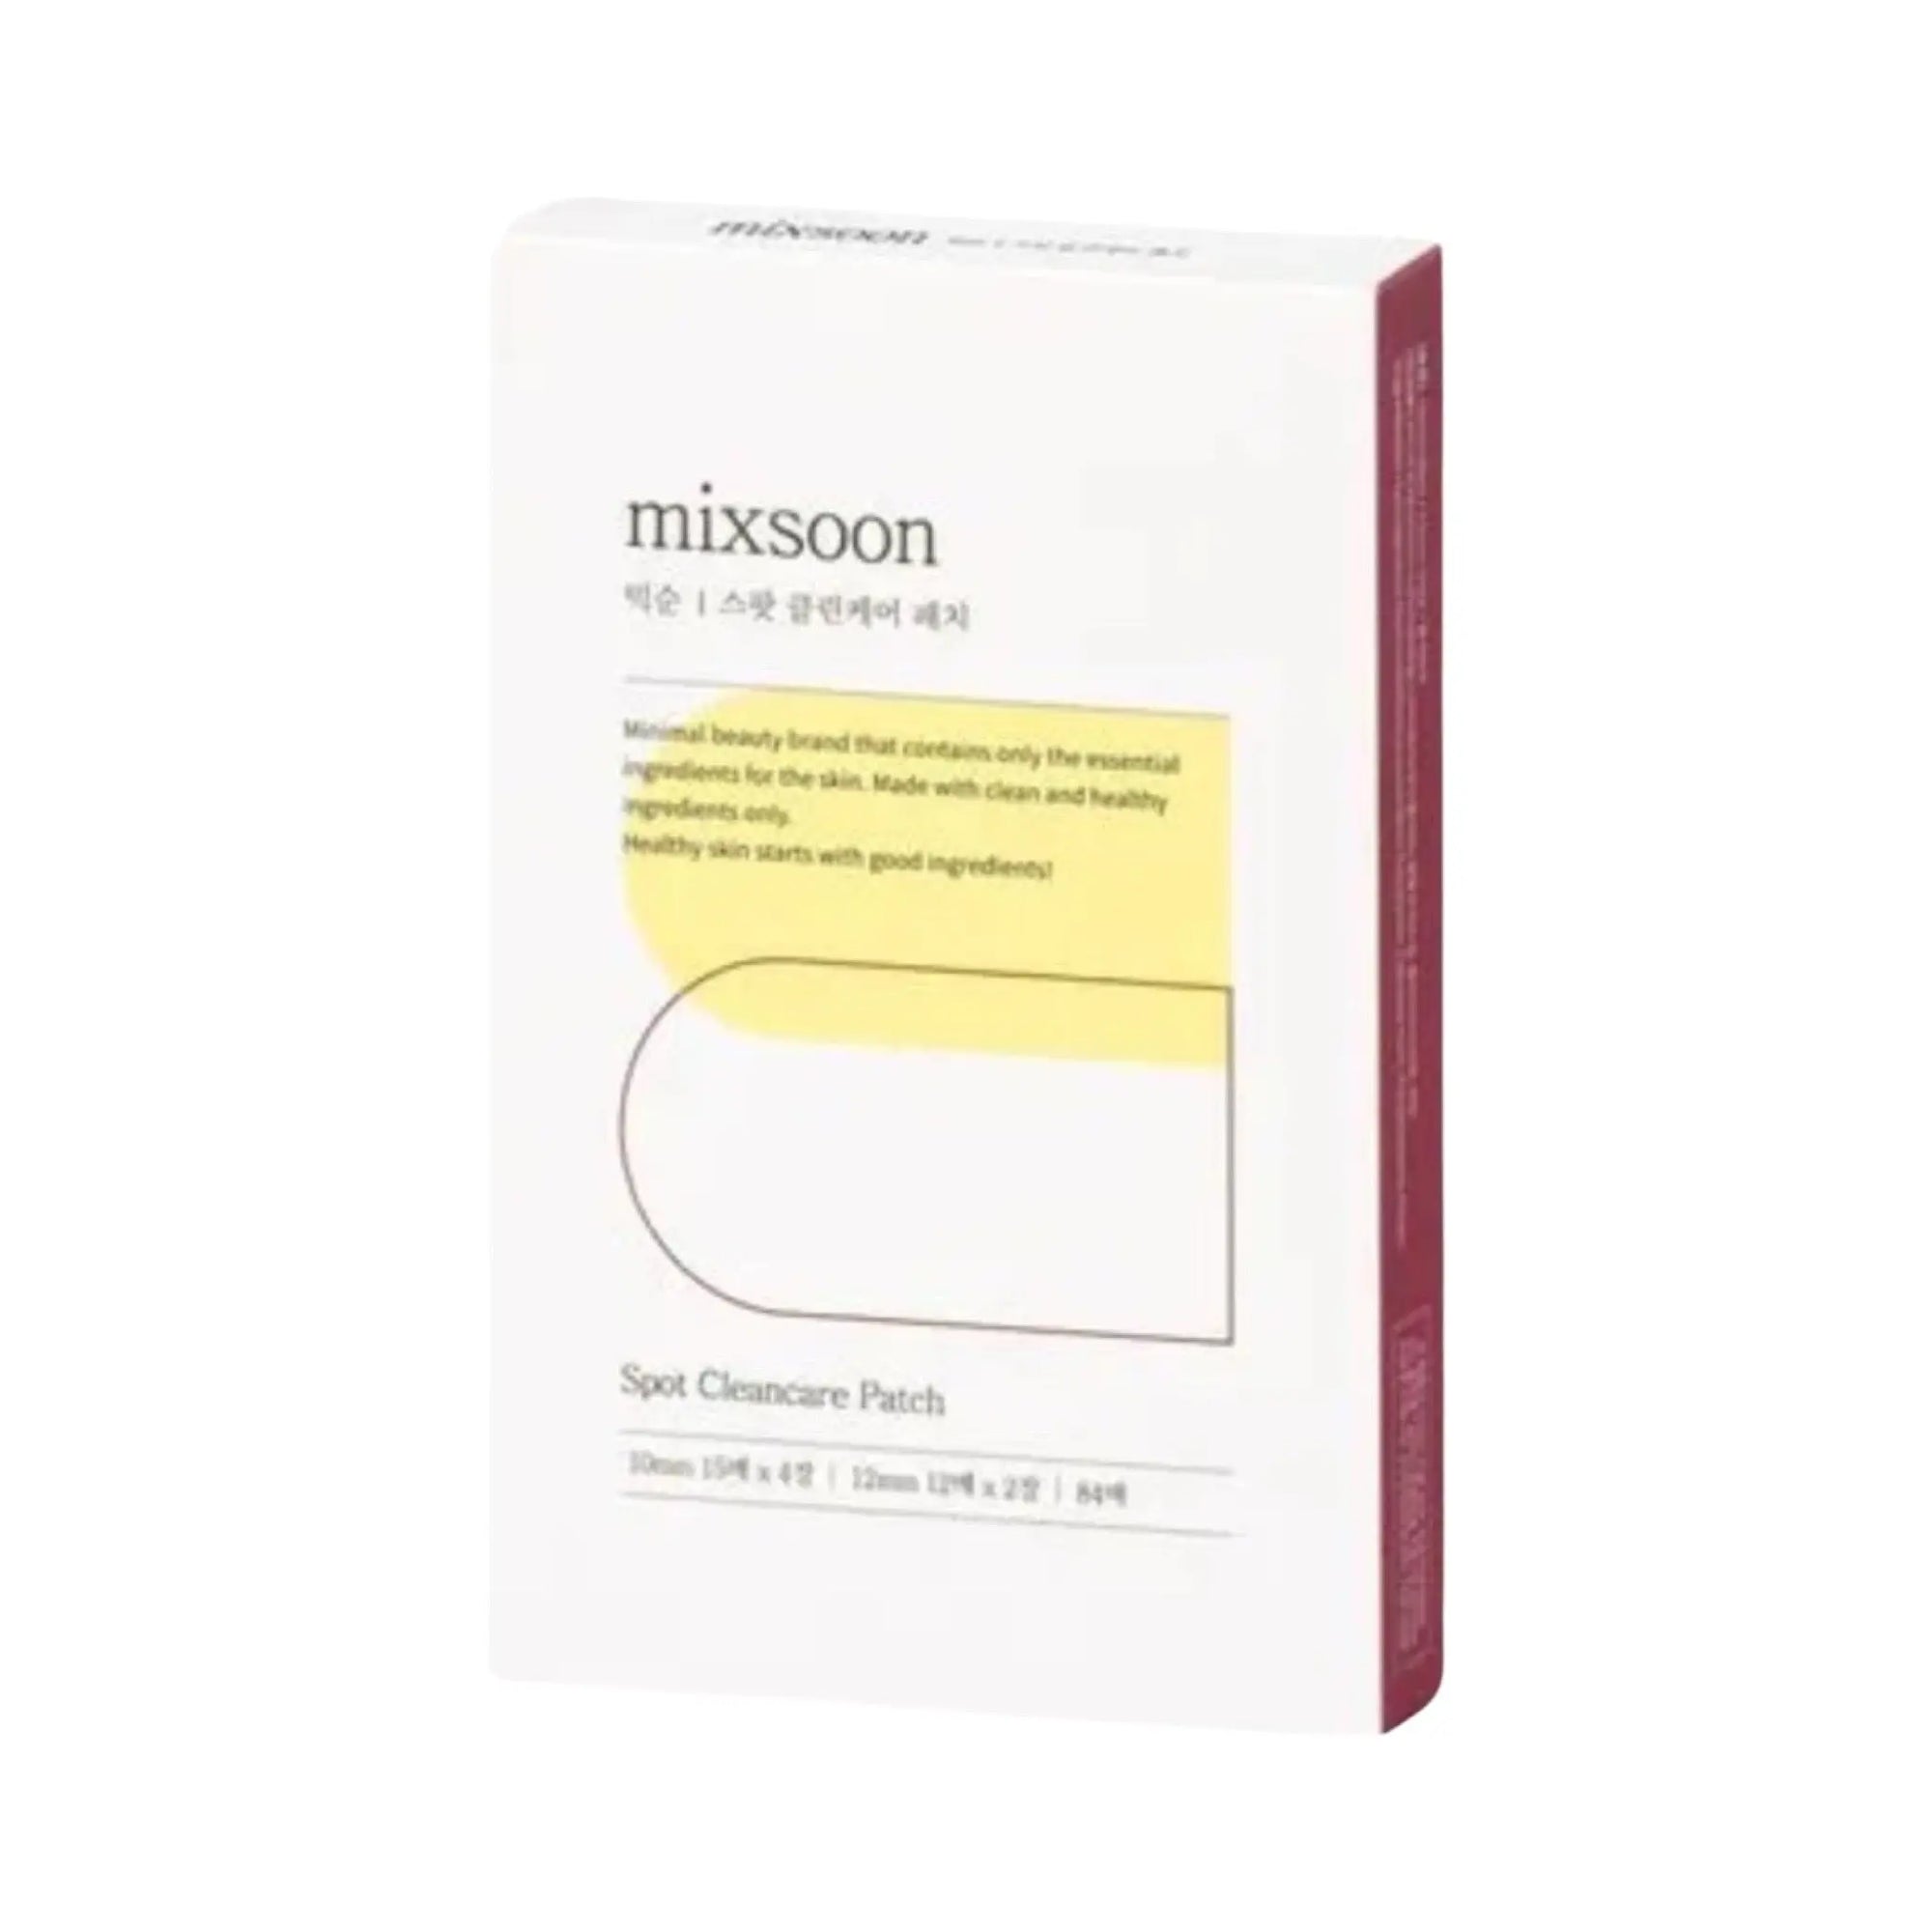 Mixsoon - Spot Clean Care Patch 84pcs Mixsoon